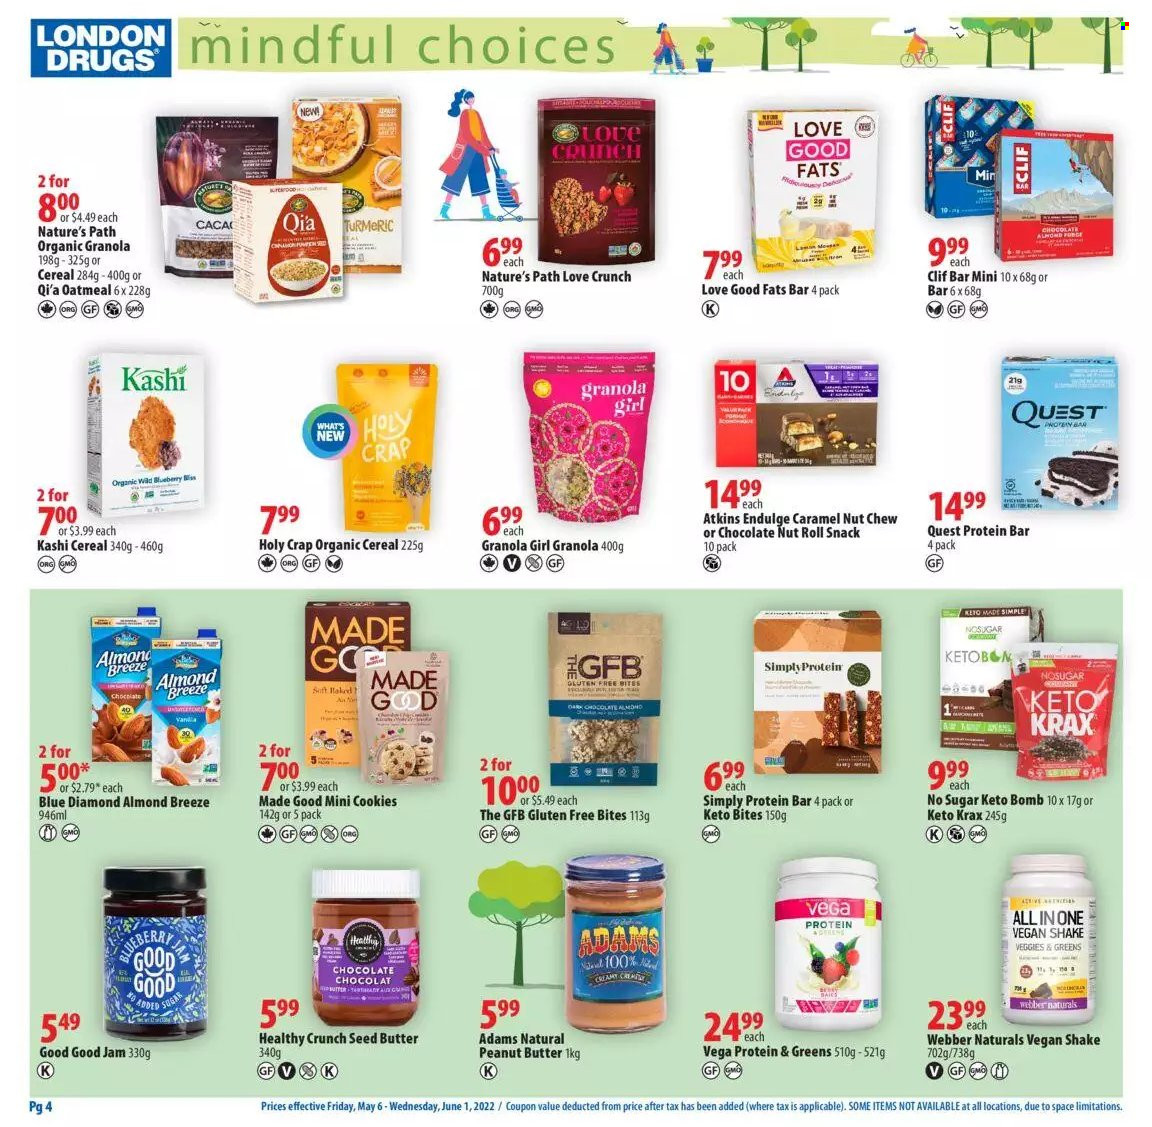 thumbnail - London Drugs Flyer - May 06, 2022 - June 01, 2022 - Sales products - cookies, chocolate, oatmeal, protein bar, turmeric, caramel, fruit jam, peanut butter, Blue Diamond, granola. Page 4.